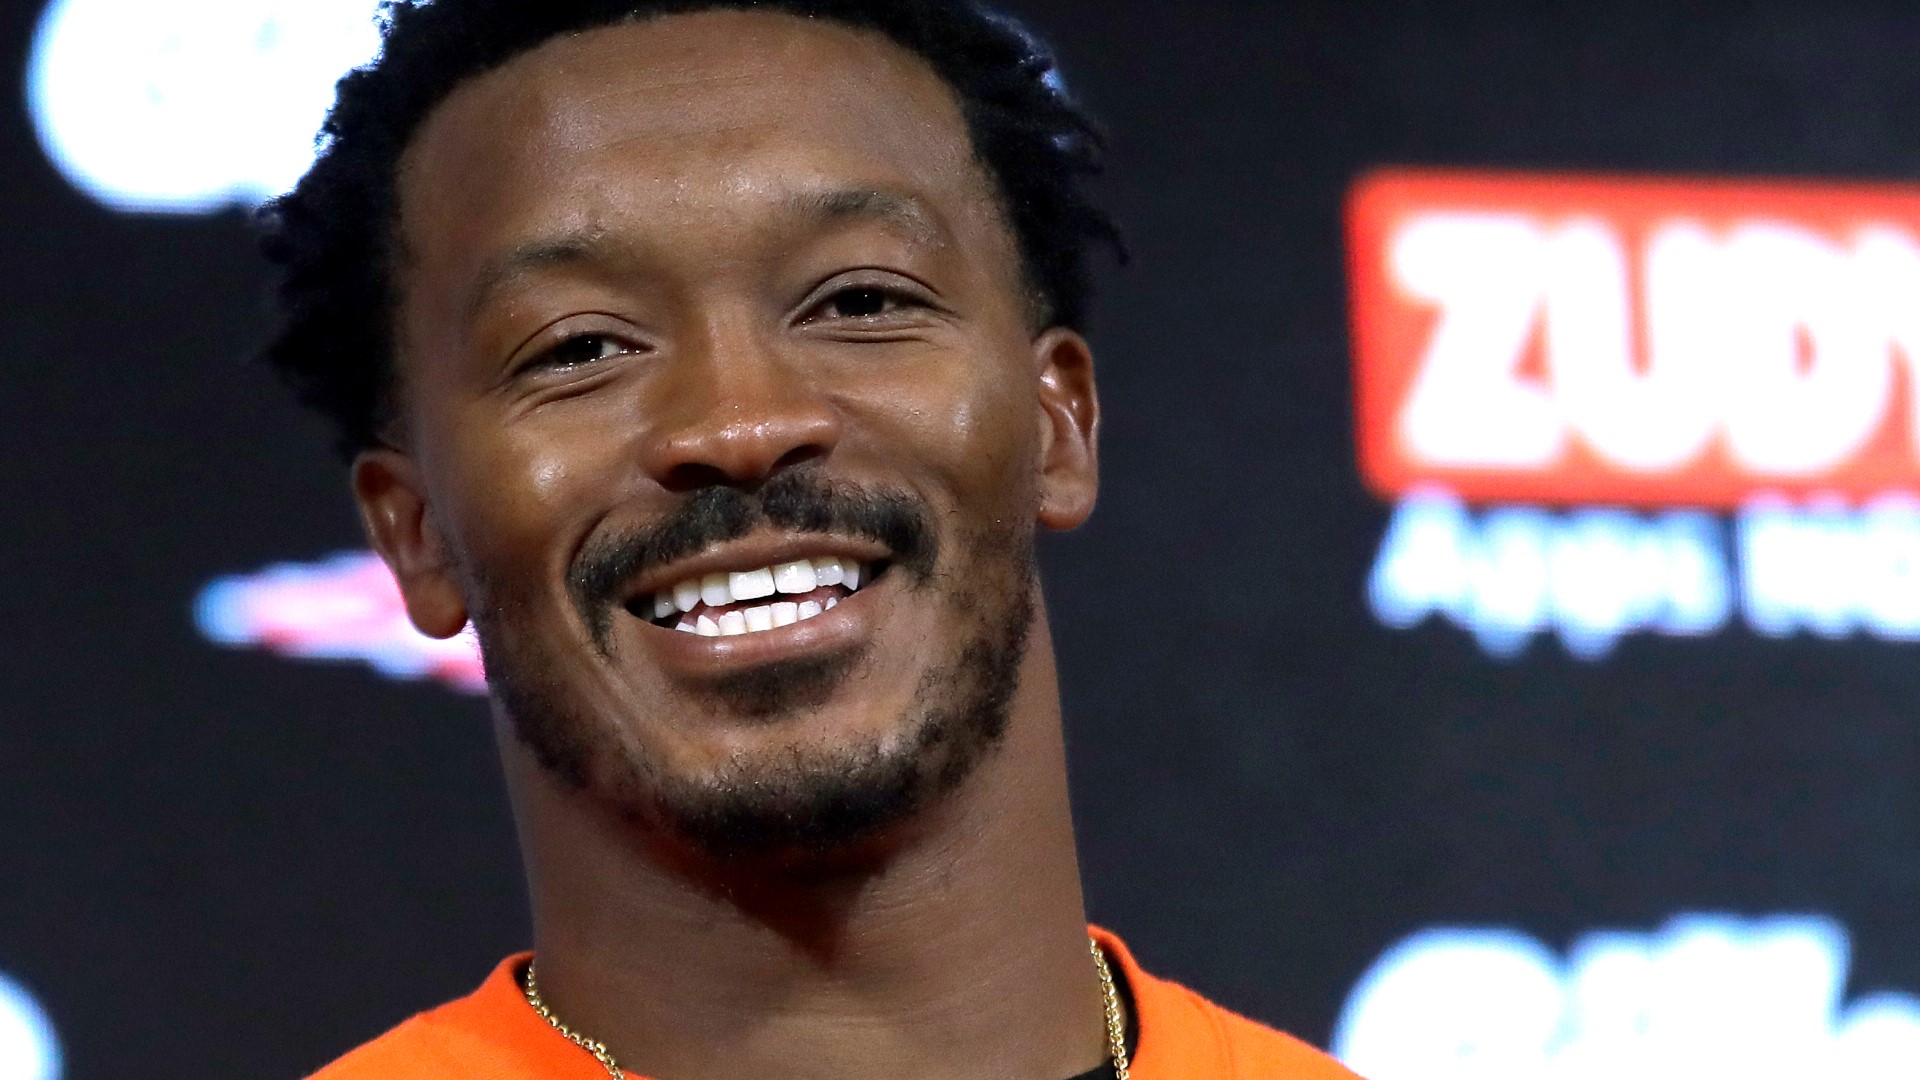 Just days away from Christmas, Georgia lost one of its own in Demaryius Thomas.